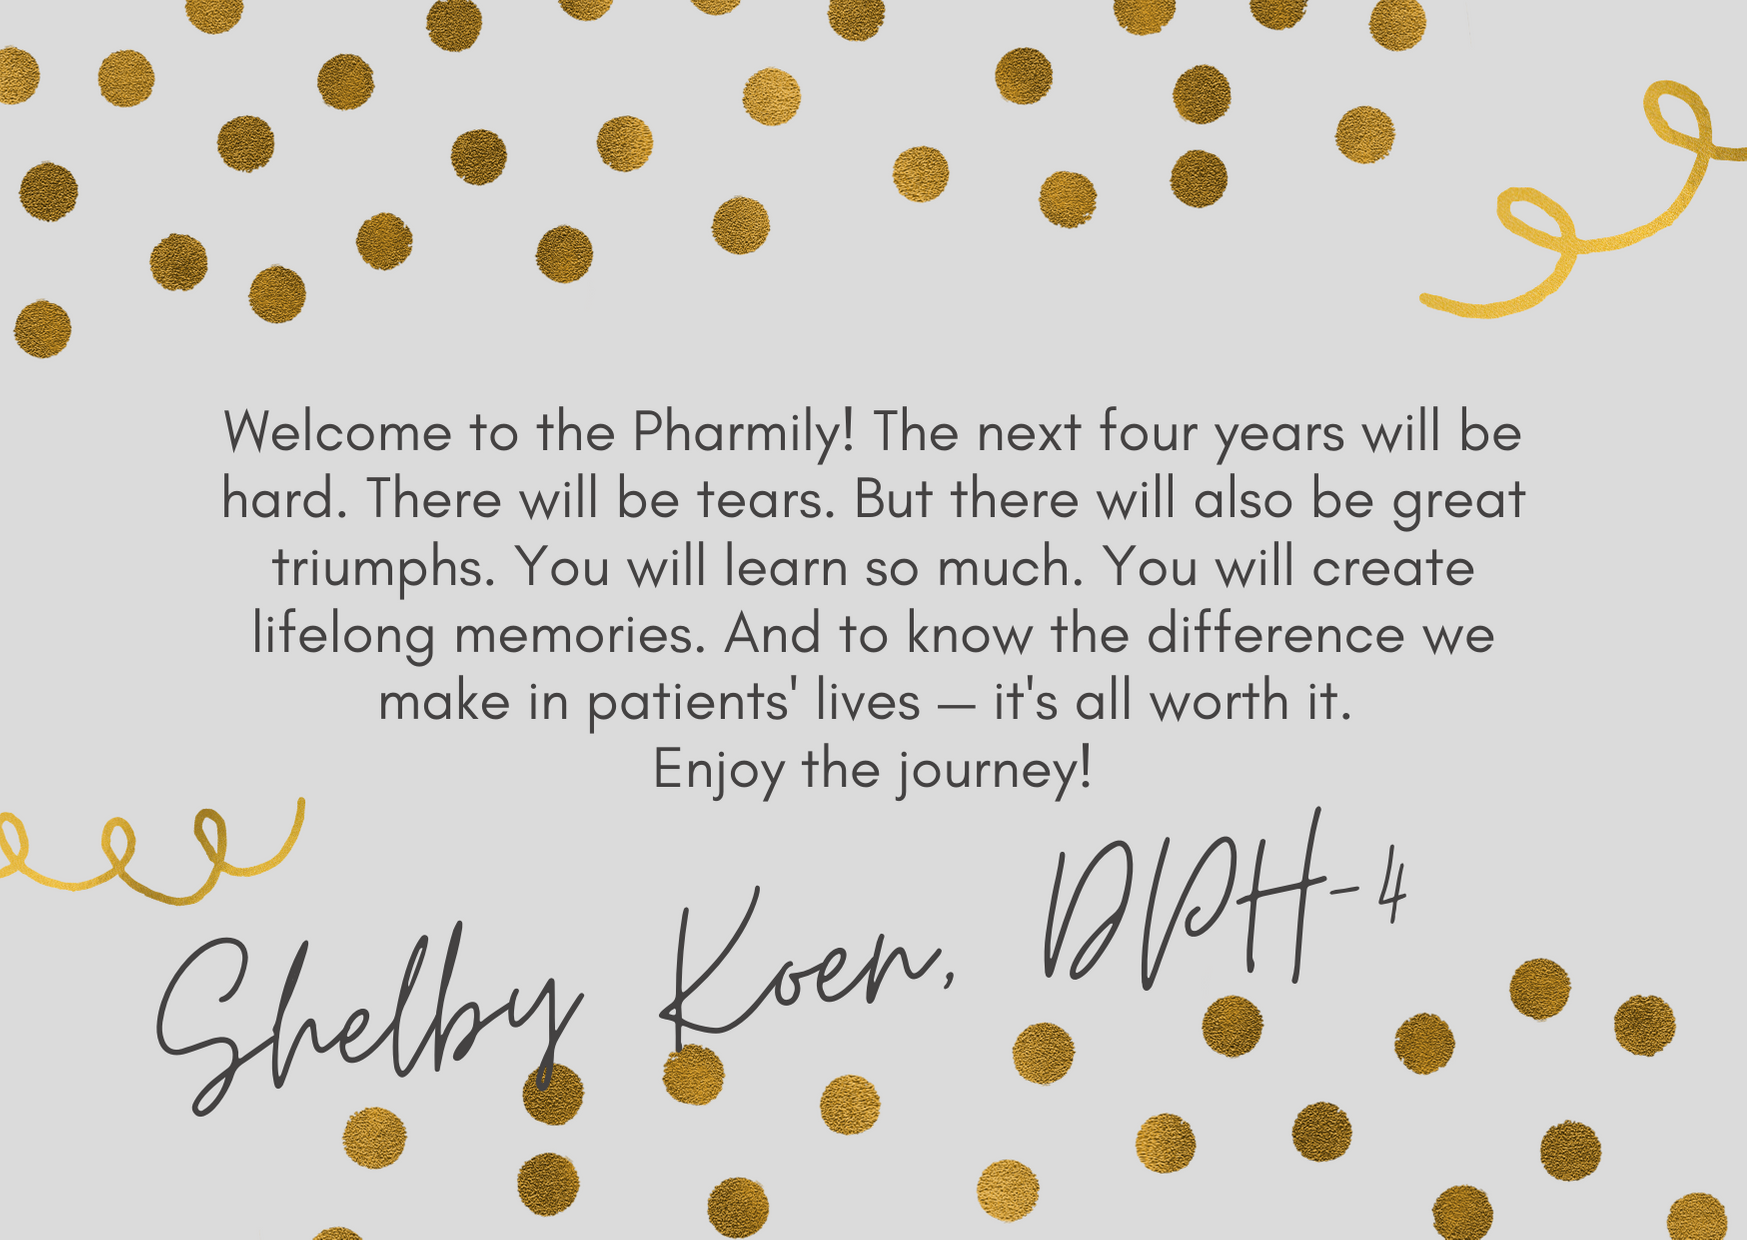 Shelby Koen's note for the White Coat Ceremony to the class of 2024